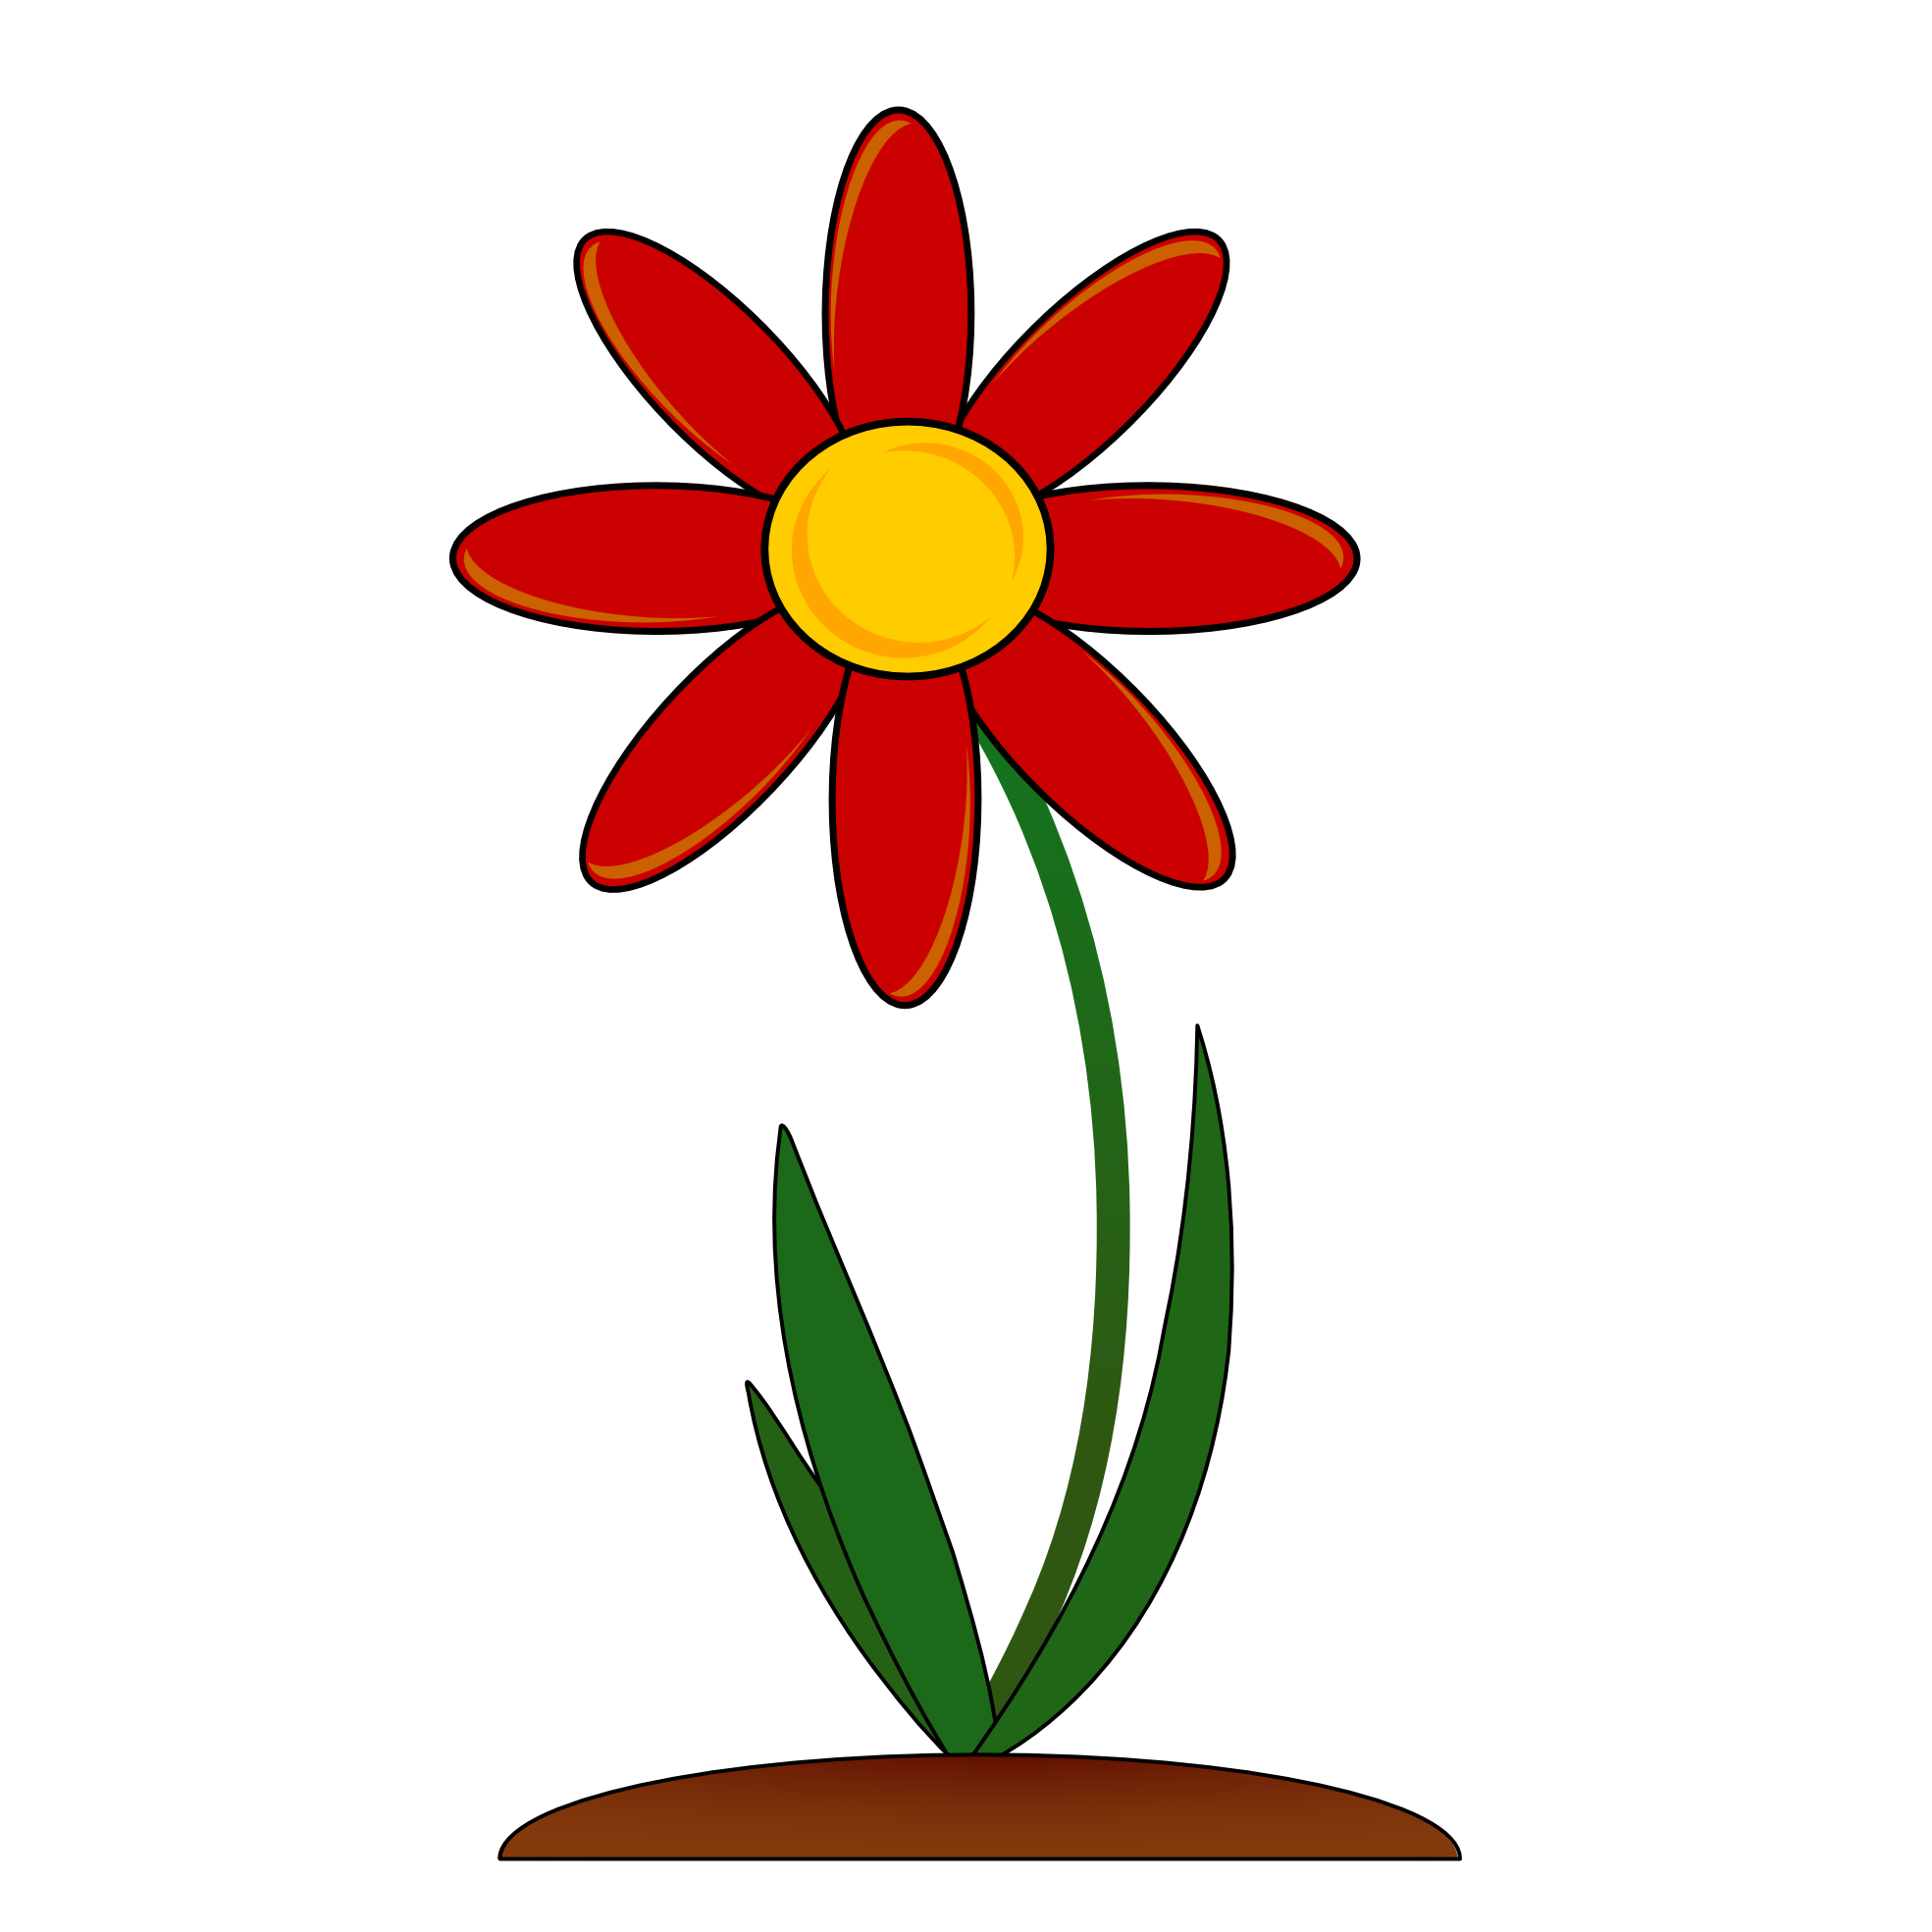 Red Flower Border Clip Art | Clipart Panda - Free Clipart Images